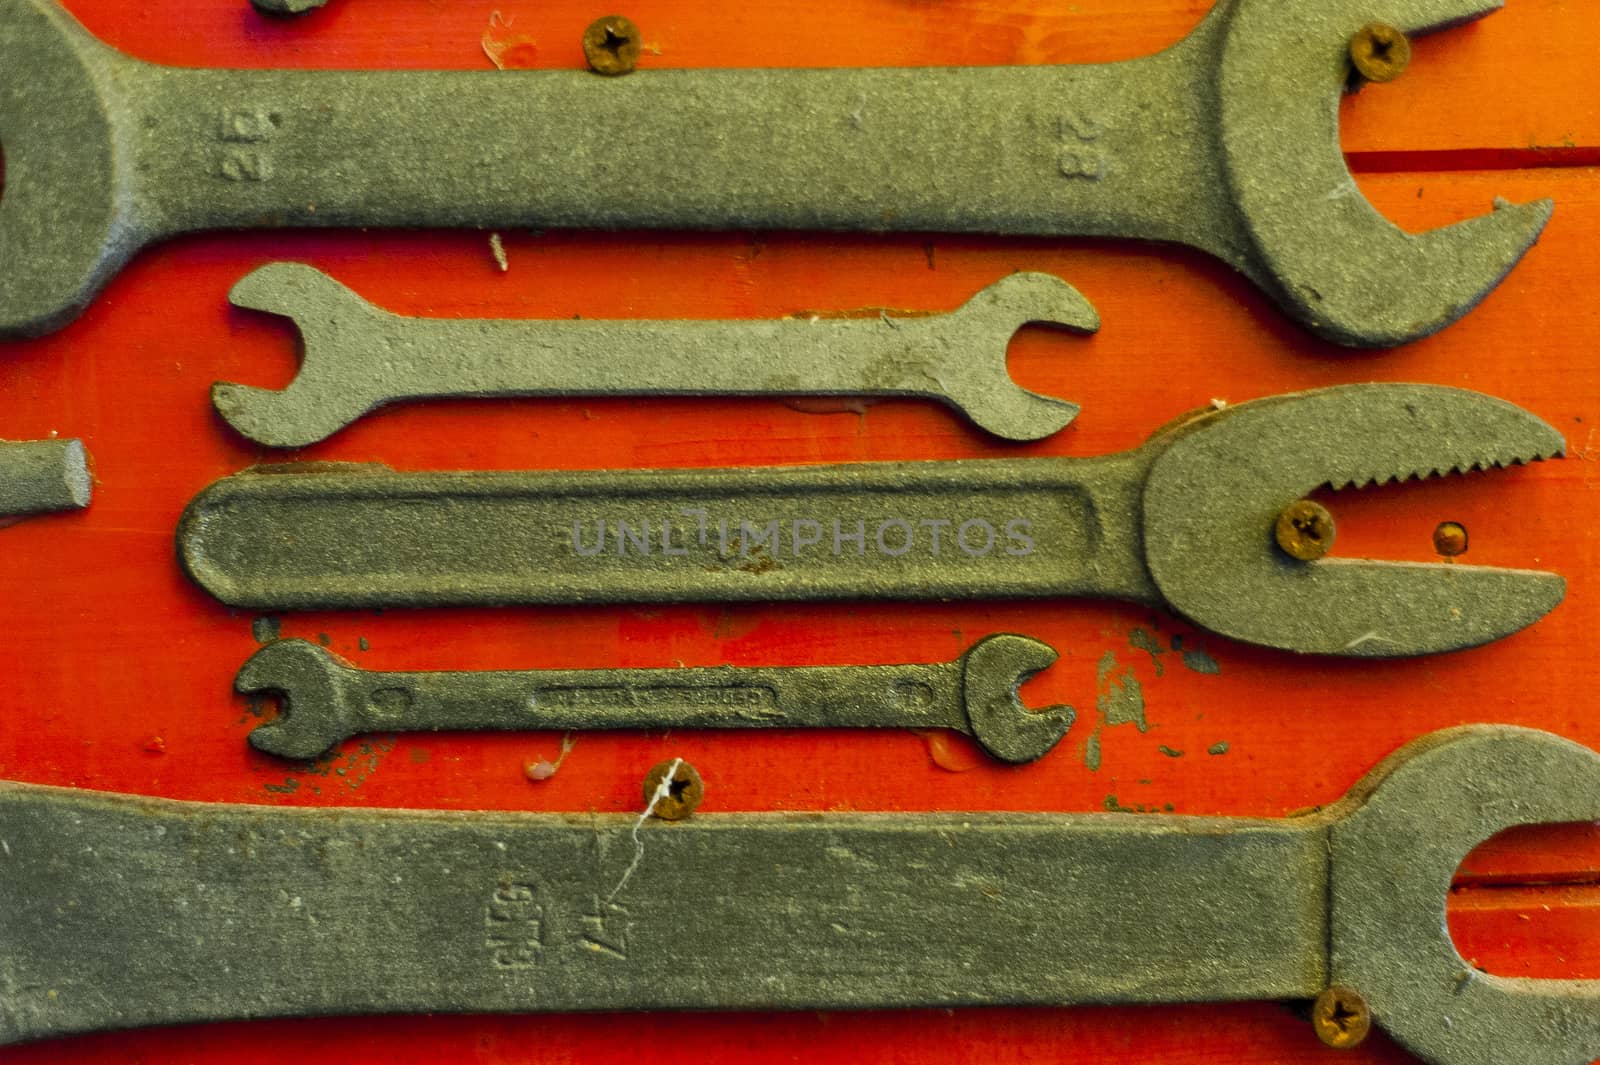 old and used english keys on red background